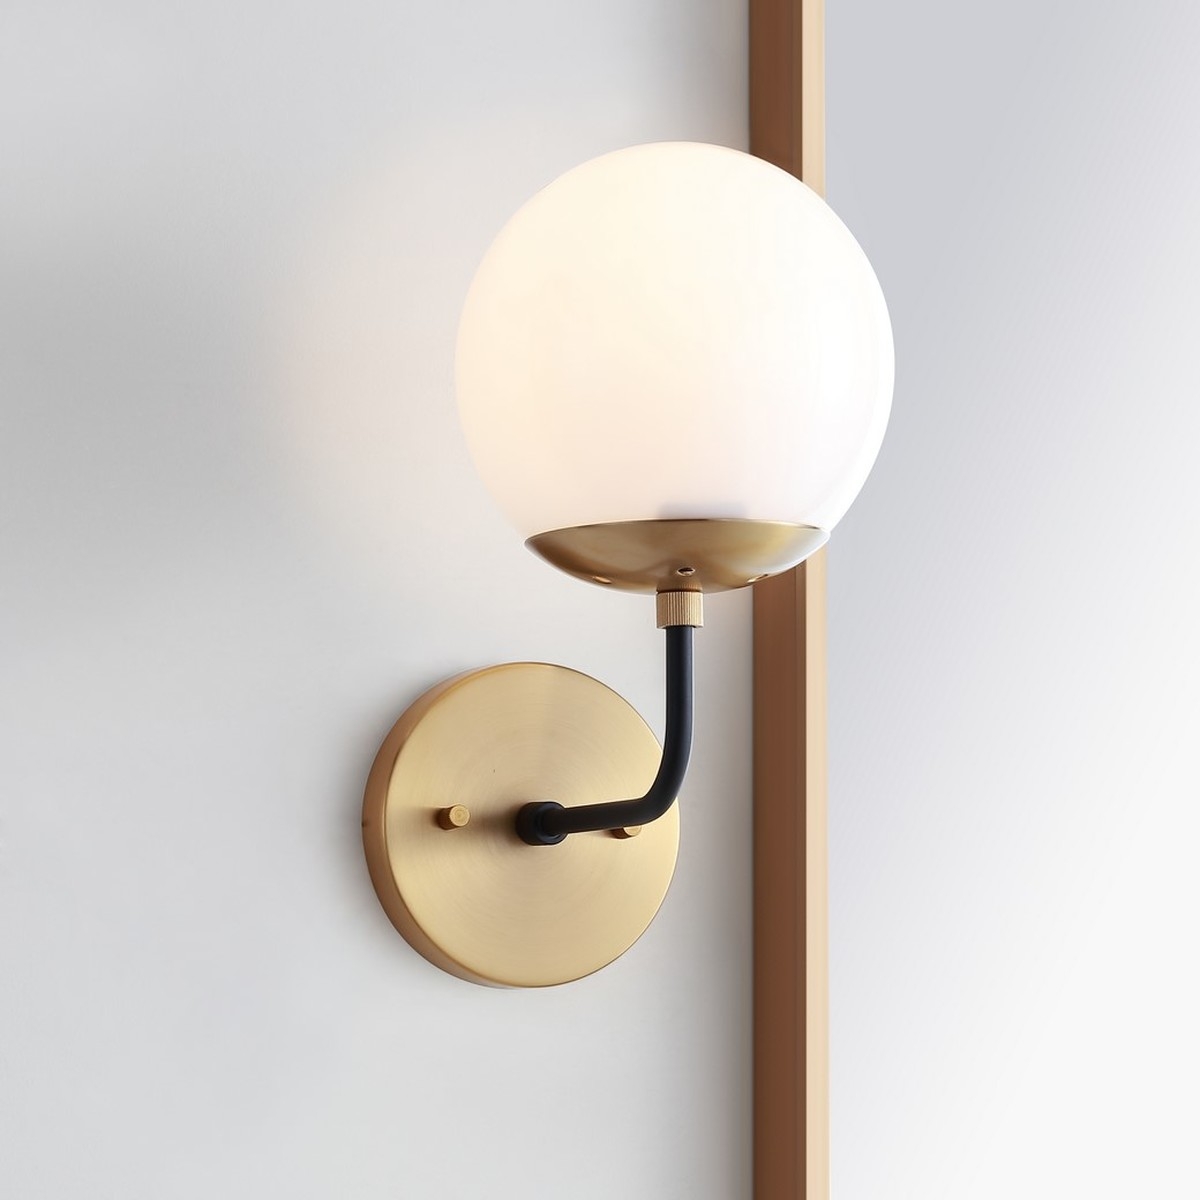 Cayden Wall Sconce - Brass - Arlo Home - Image 3